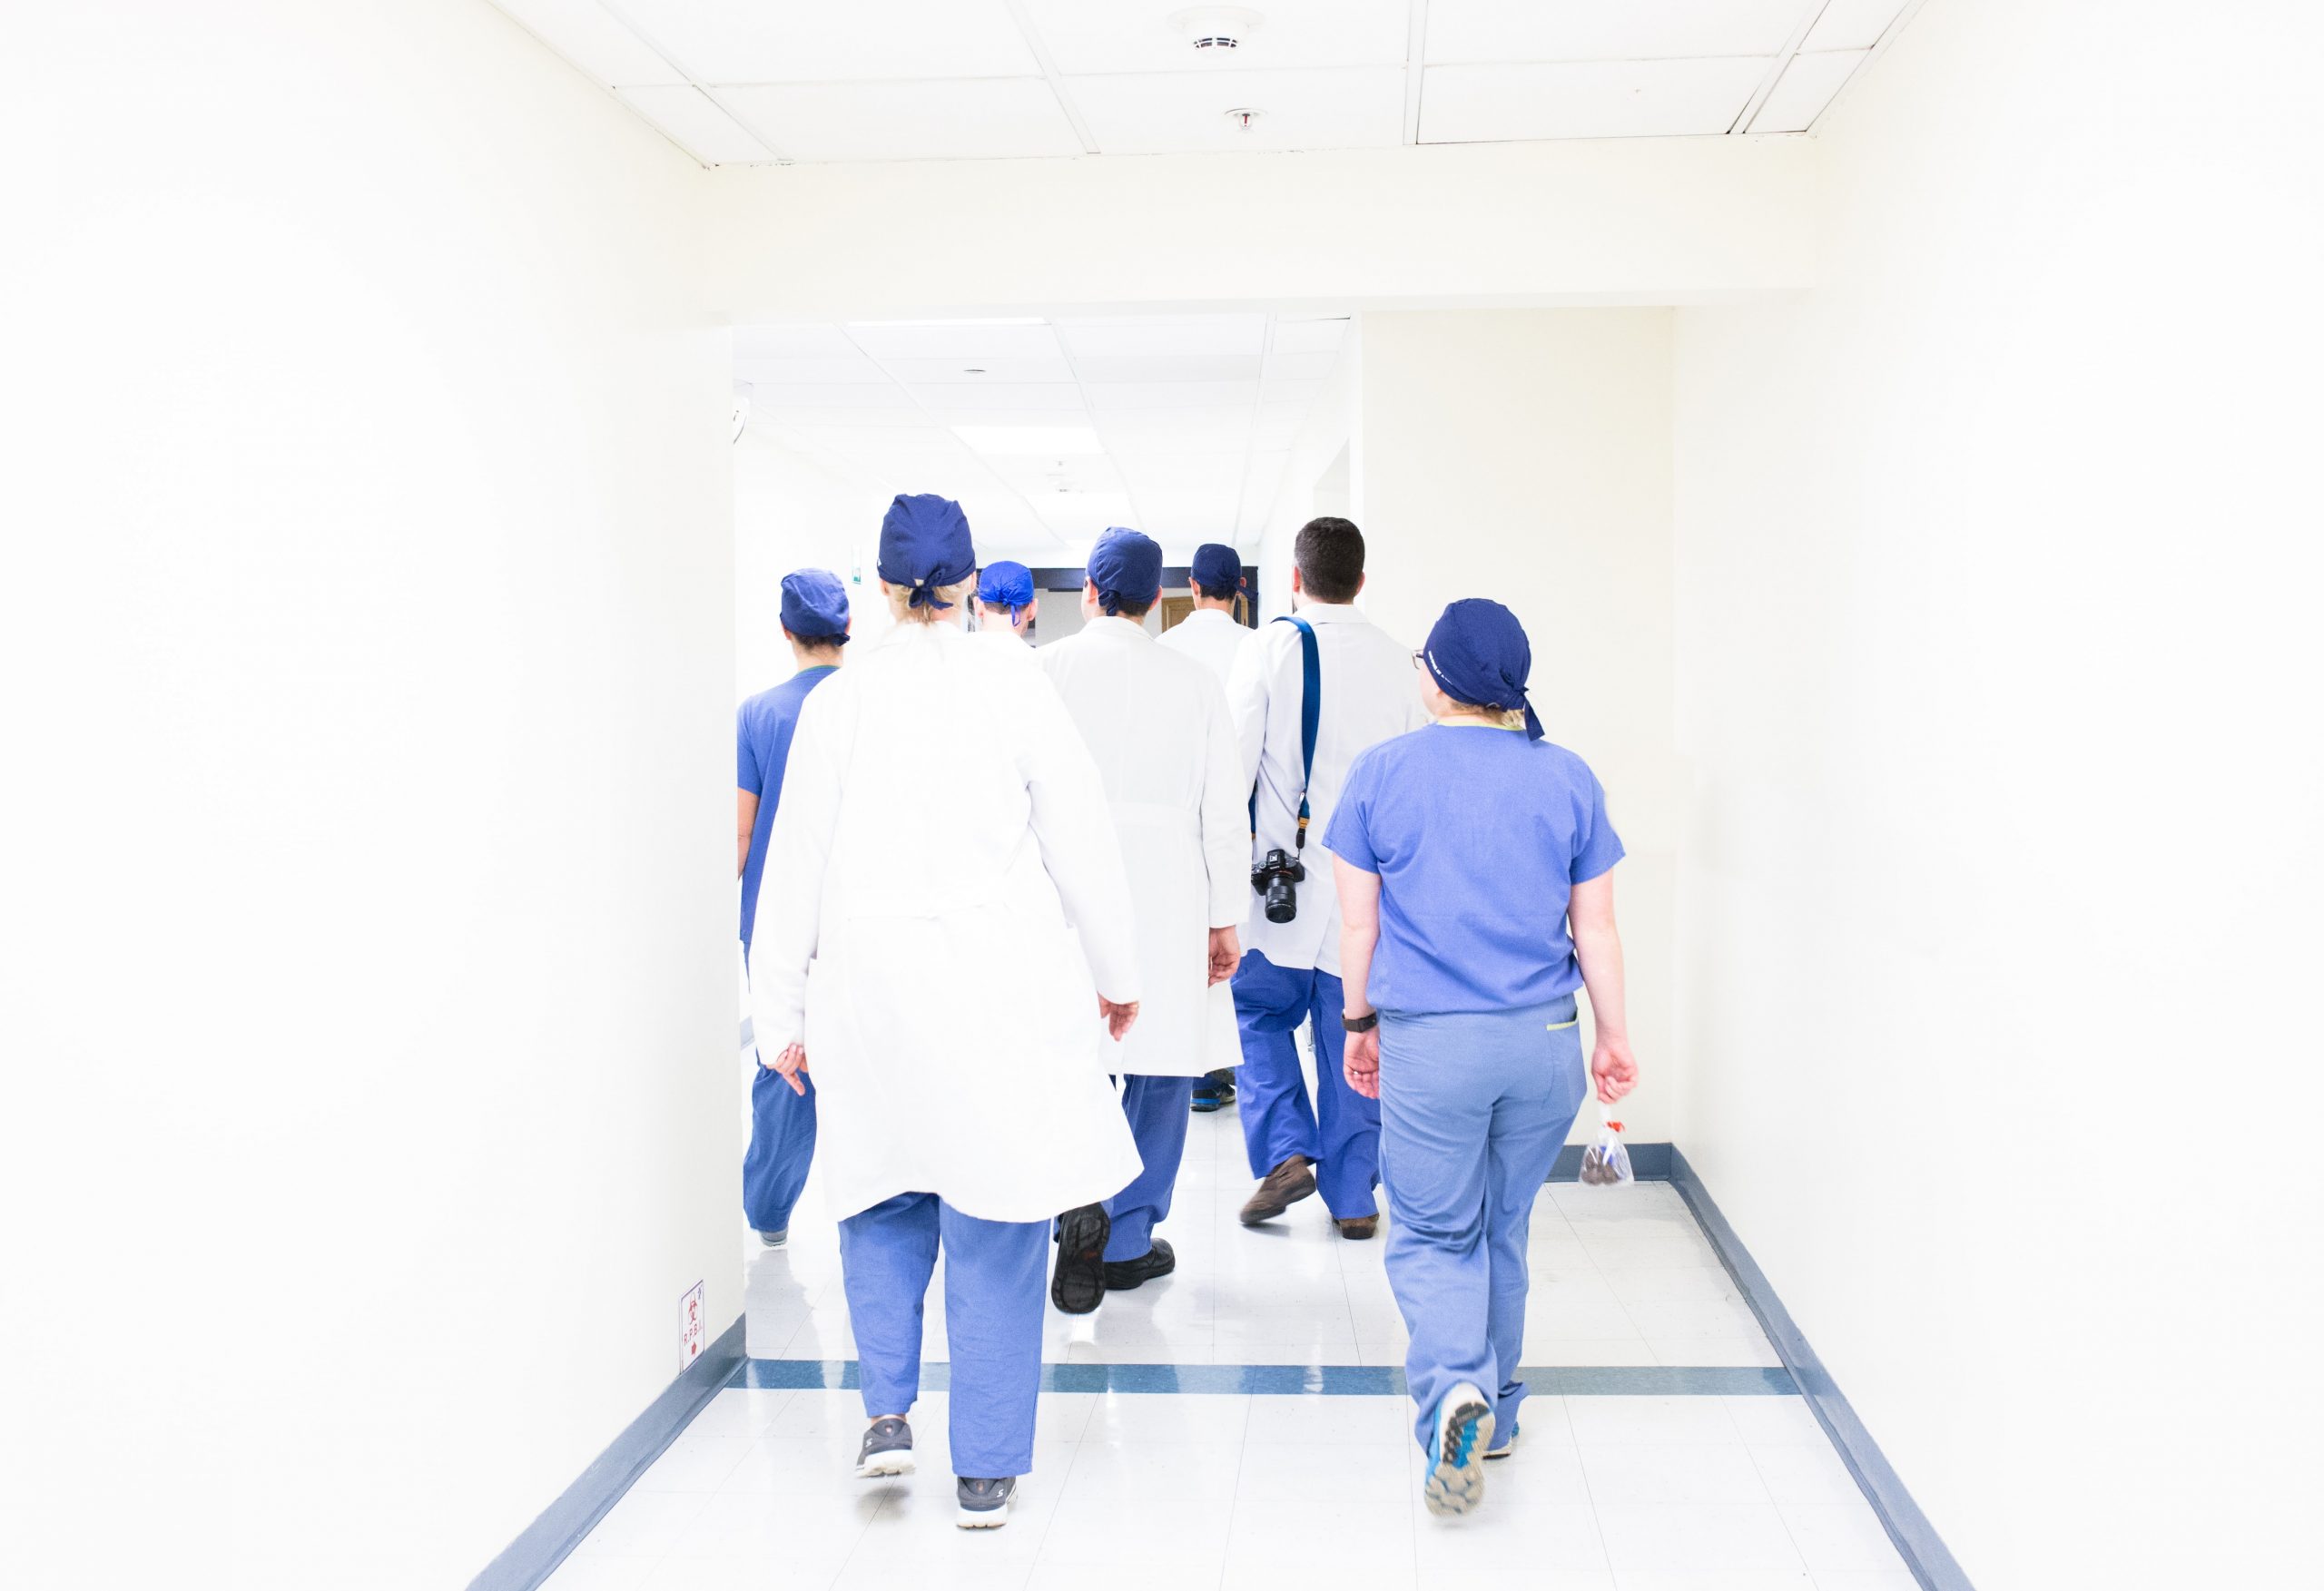 Image shows healthcare workers walking down a corridor in PPEscrubs